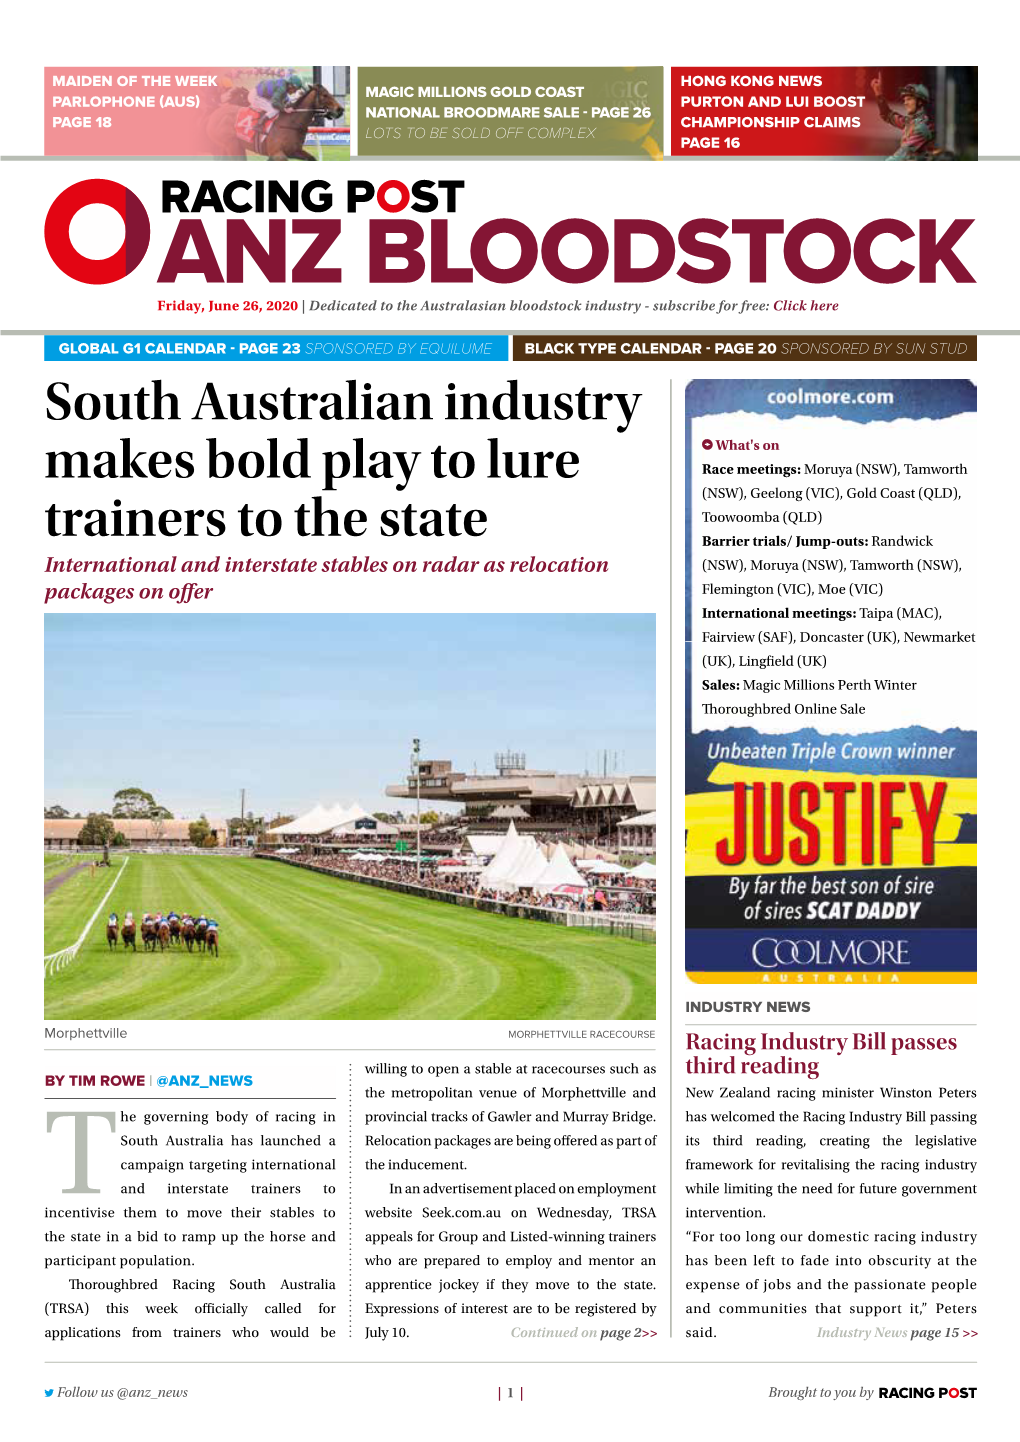 South Australian Industry Makes Bold Play to Lure Trainers to the State | 2 | Friday, June 26, 2020